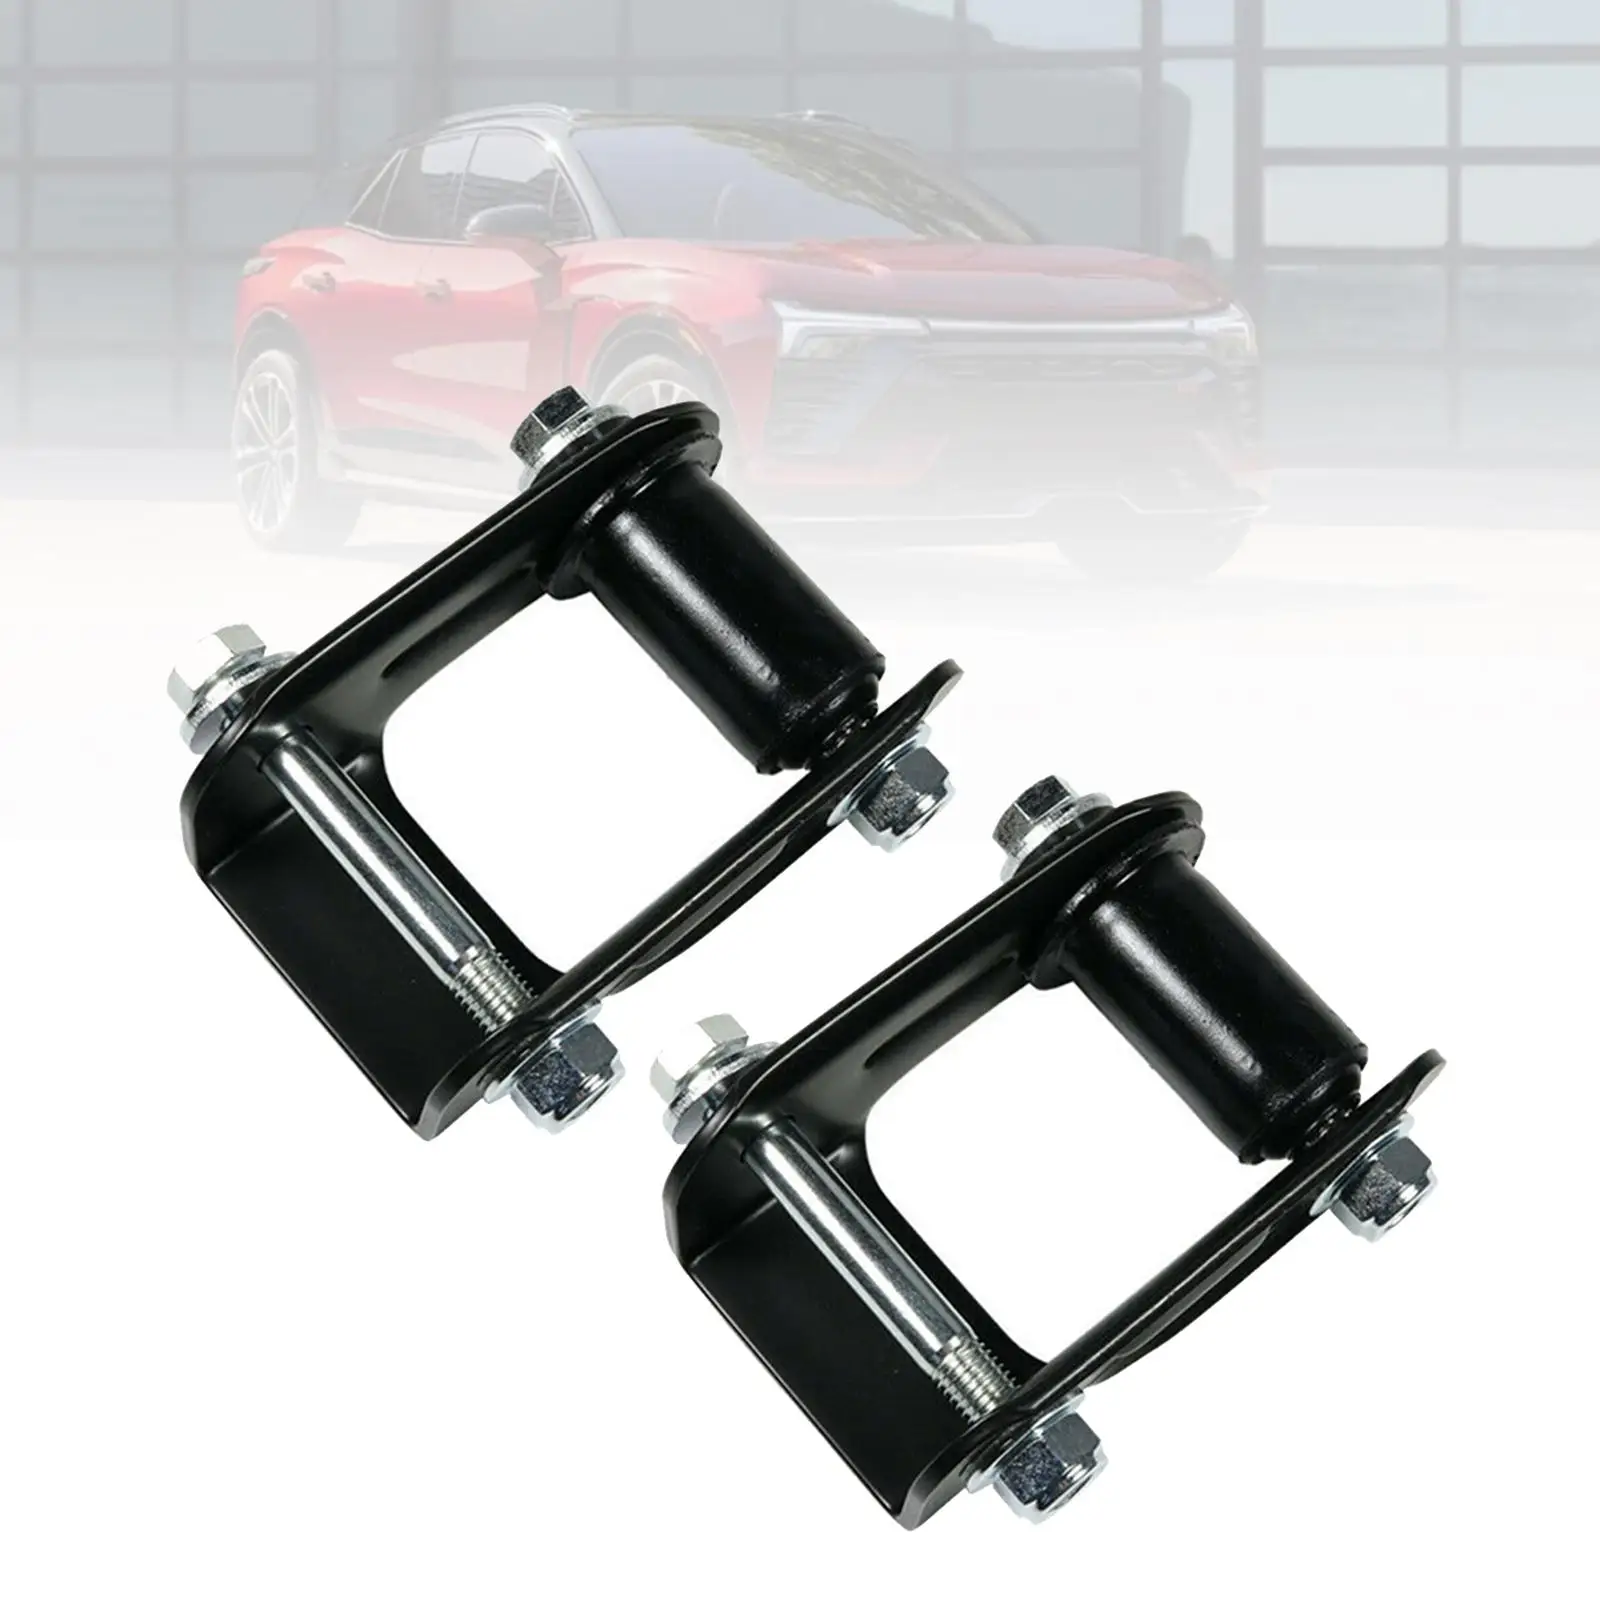 2Pcs Rear Leaf Spring Shackle Kit Exquisite Workmanship Easily Install Durable Decorative Accessories for Chevrolet Blazer